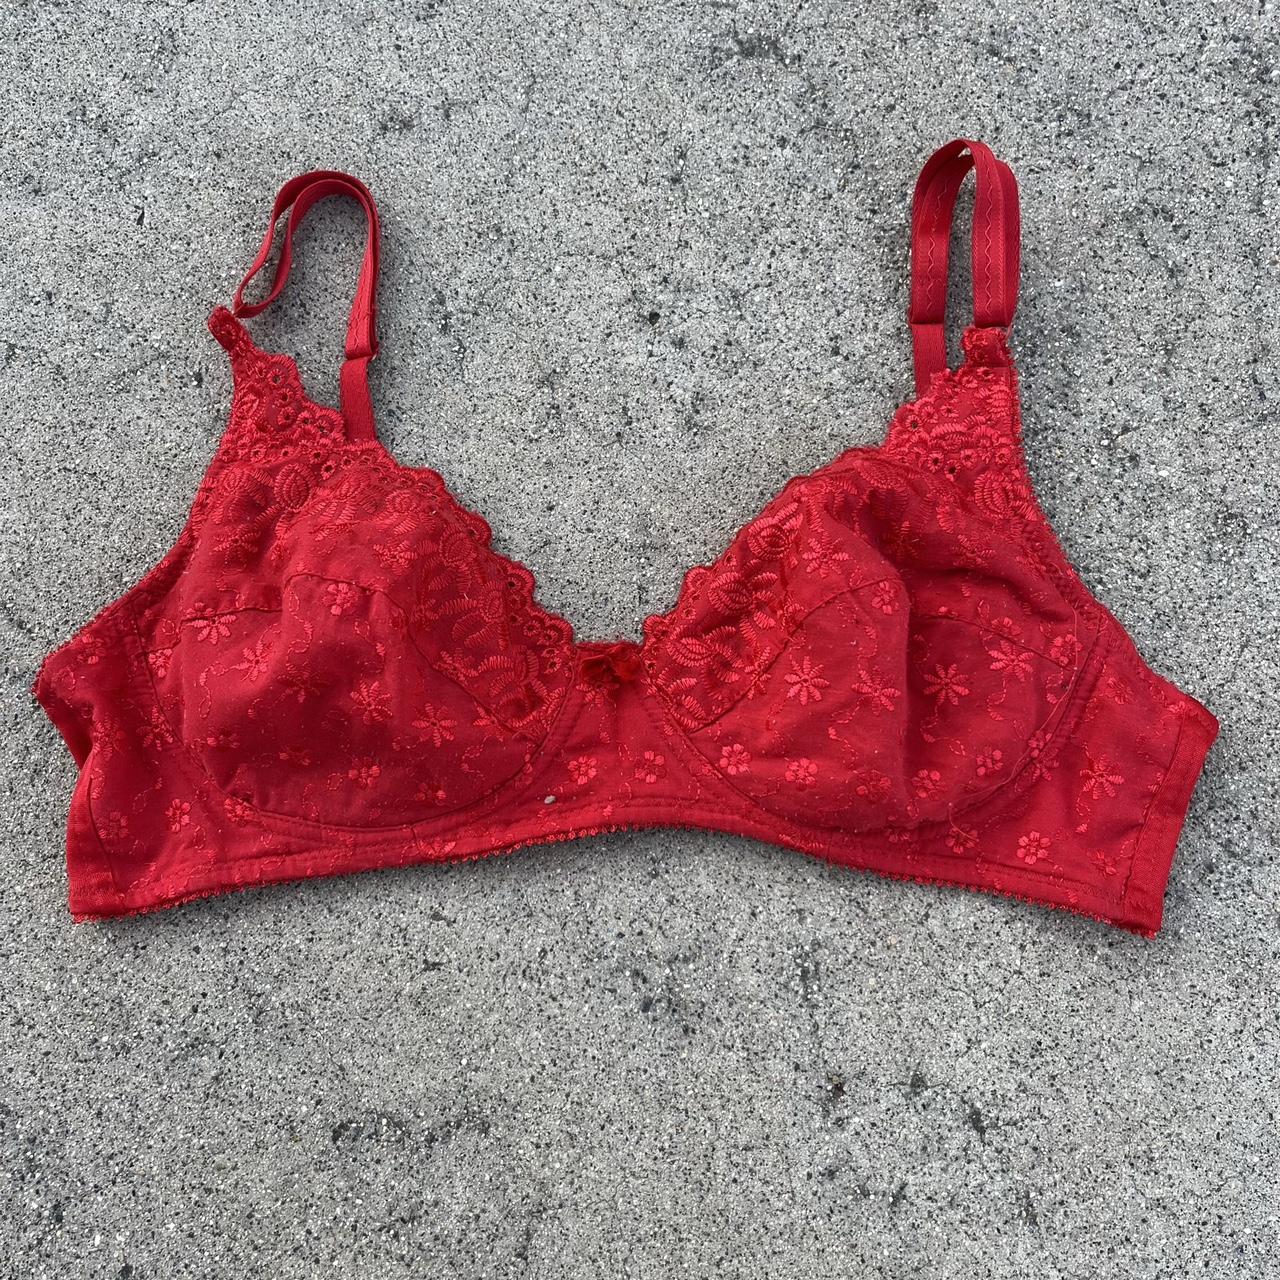 Vintage 80's / 90's red eyelet lace bra. This red - Depop